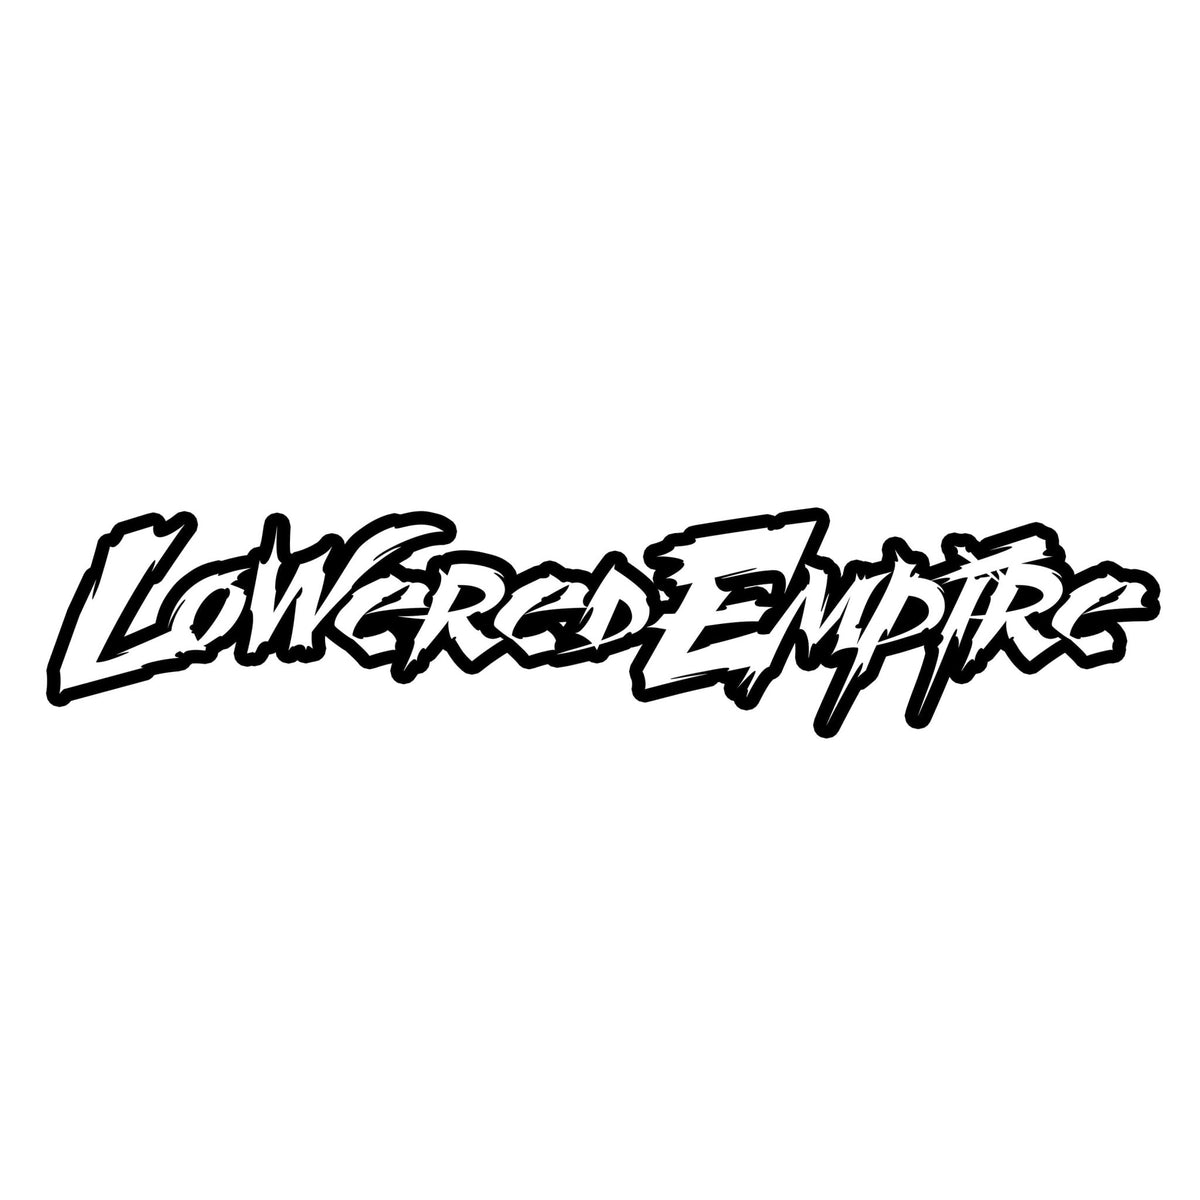 25" Aggressive Lowered Empire Banner - Loweredempire